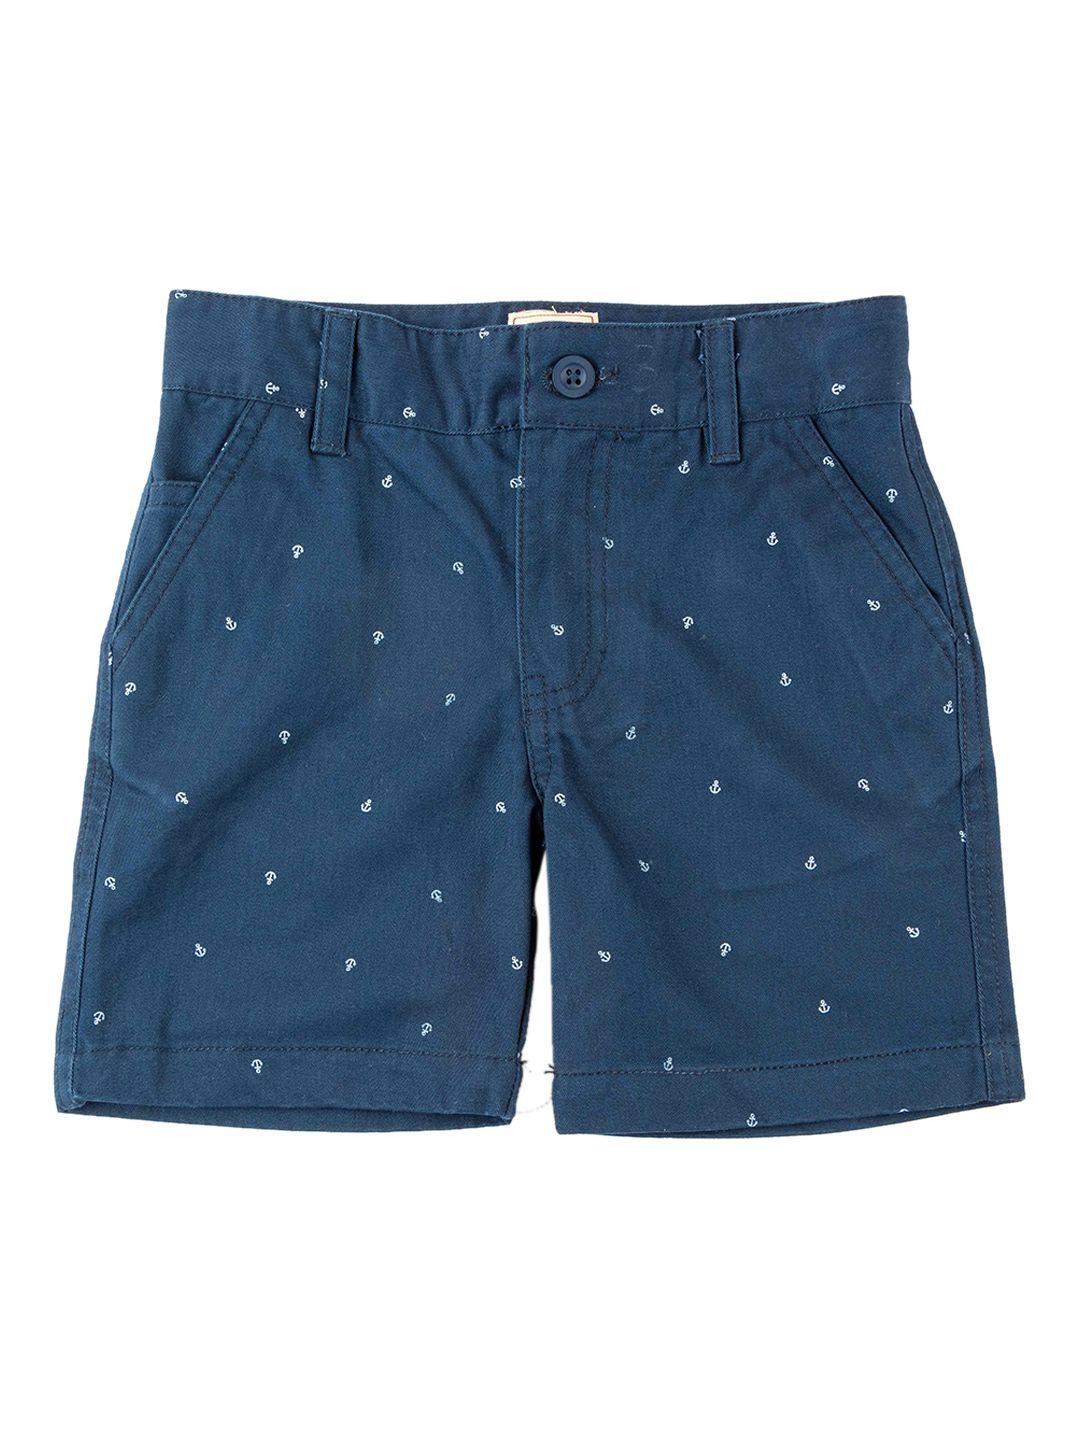 juscubs boys navy blue cotton printed outdoor shorts